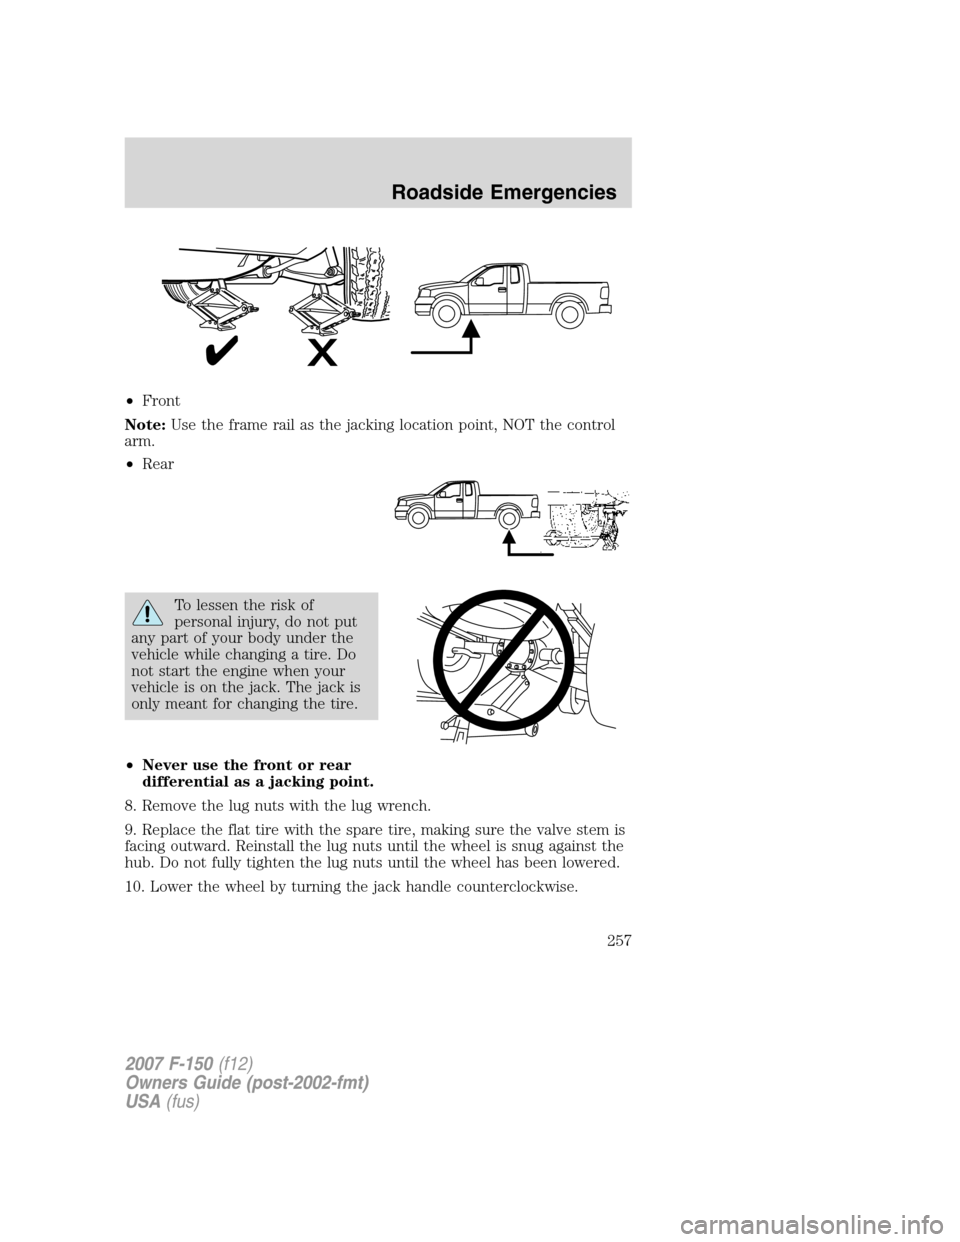 FORD F150 2007 11.G Owners Manual •Front
Note:Use the frame rail as the jacking location point, NOT the control
arm.
•Rear
To lessen the risk of
personal injury, do not put
any part of your body under the
vehicle while changing a 